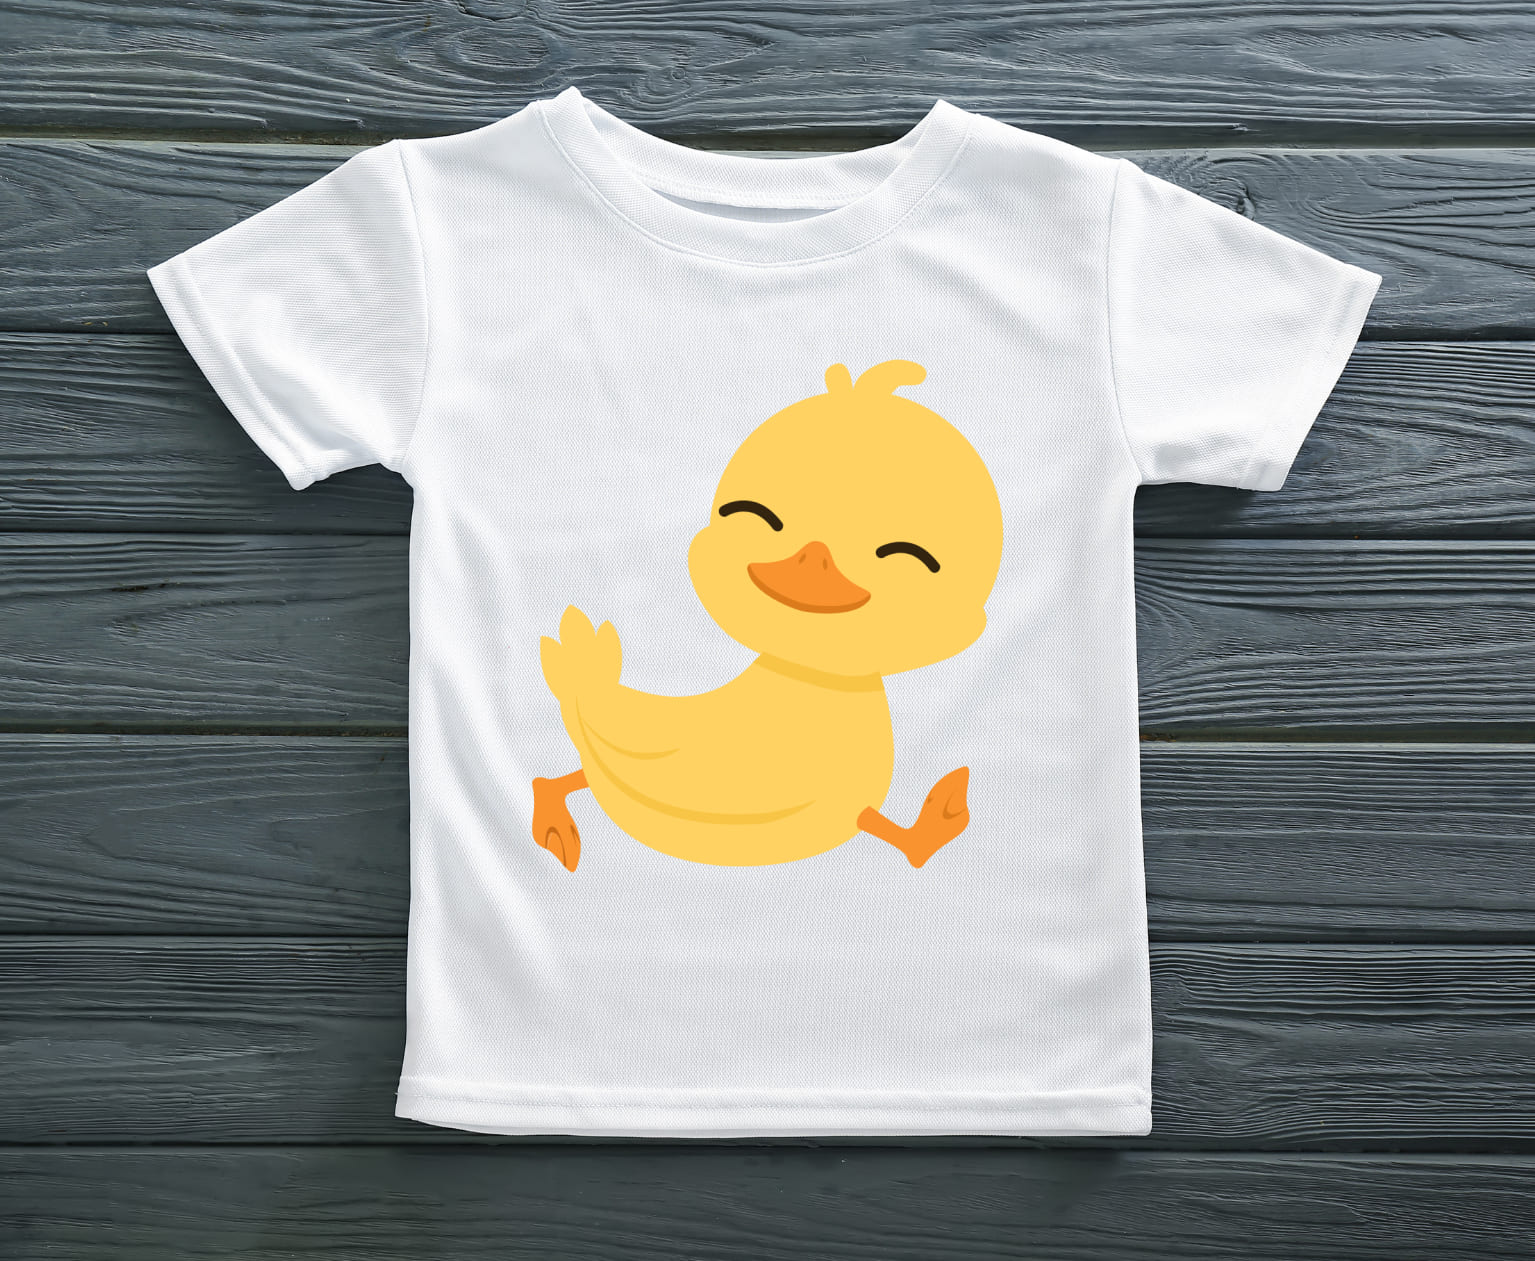 Image of white t-shirt with cheerful print of a cute duck.